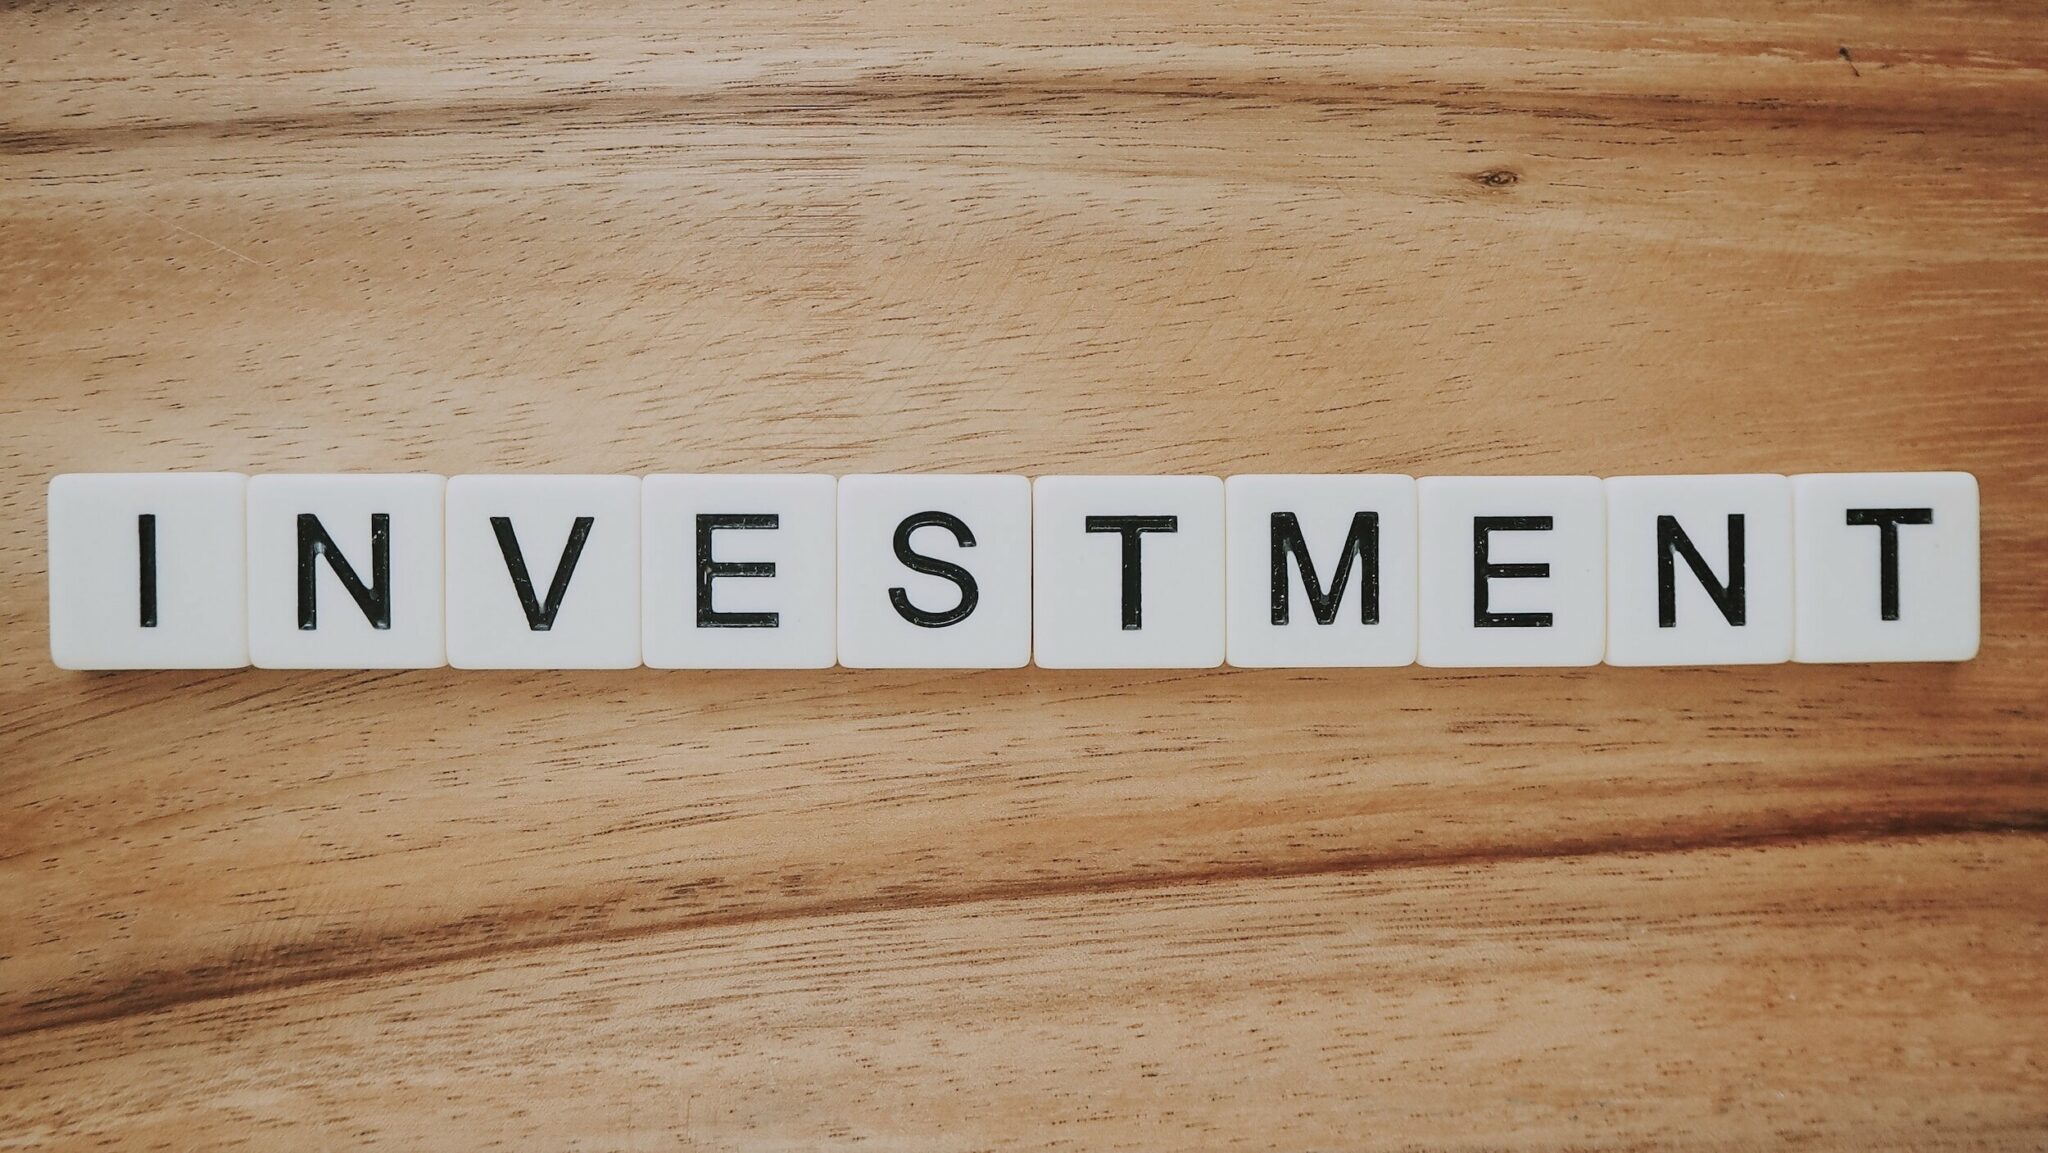 Scrabble pieces spelling out "INVESTMENT"